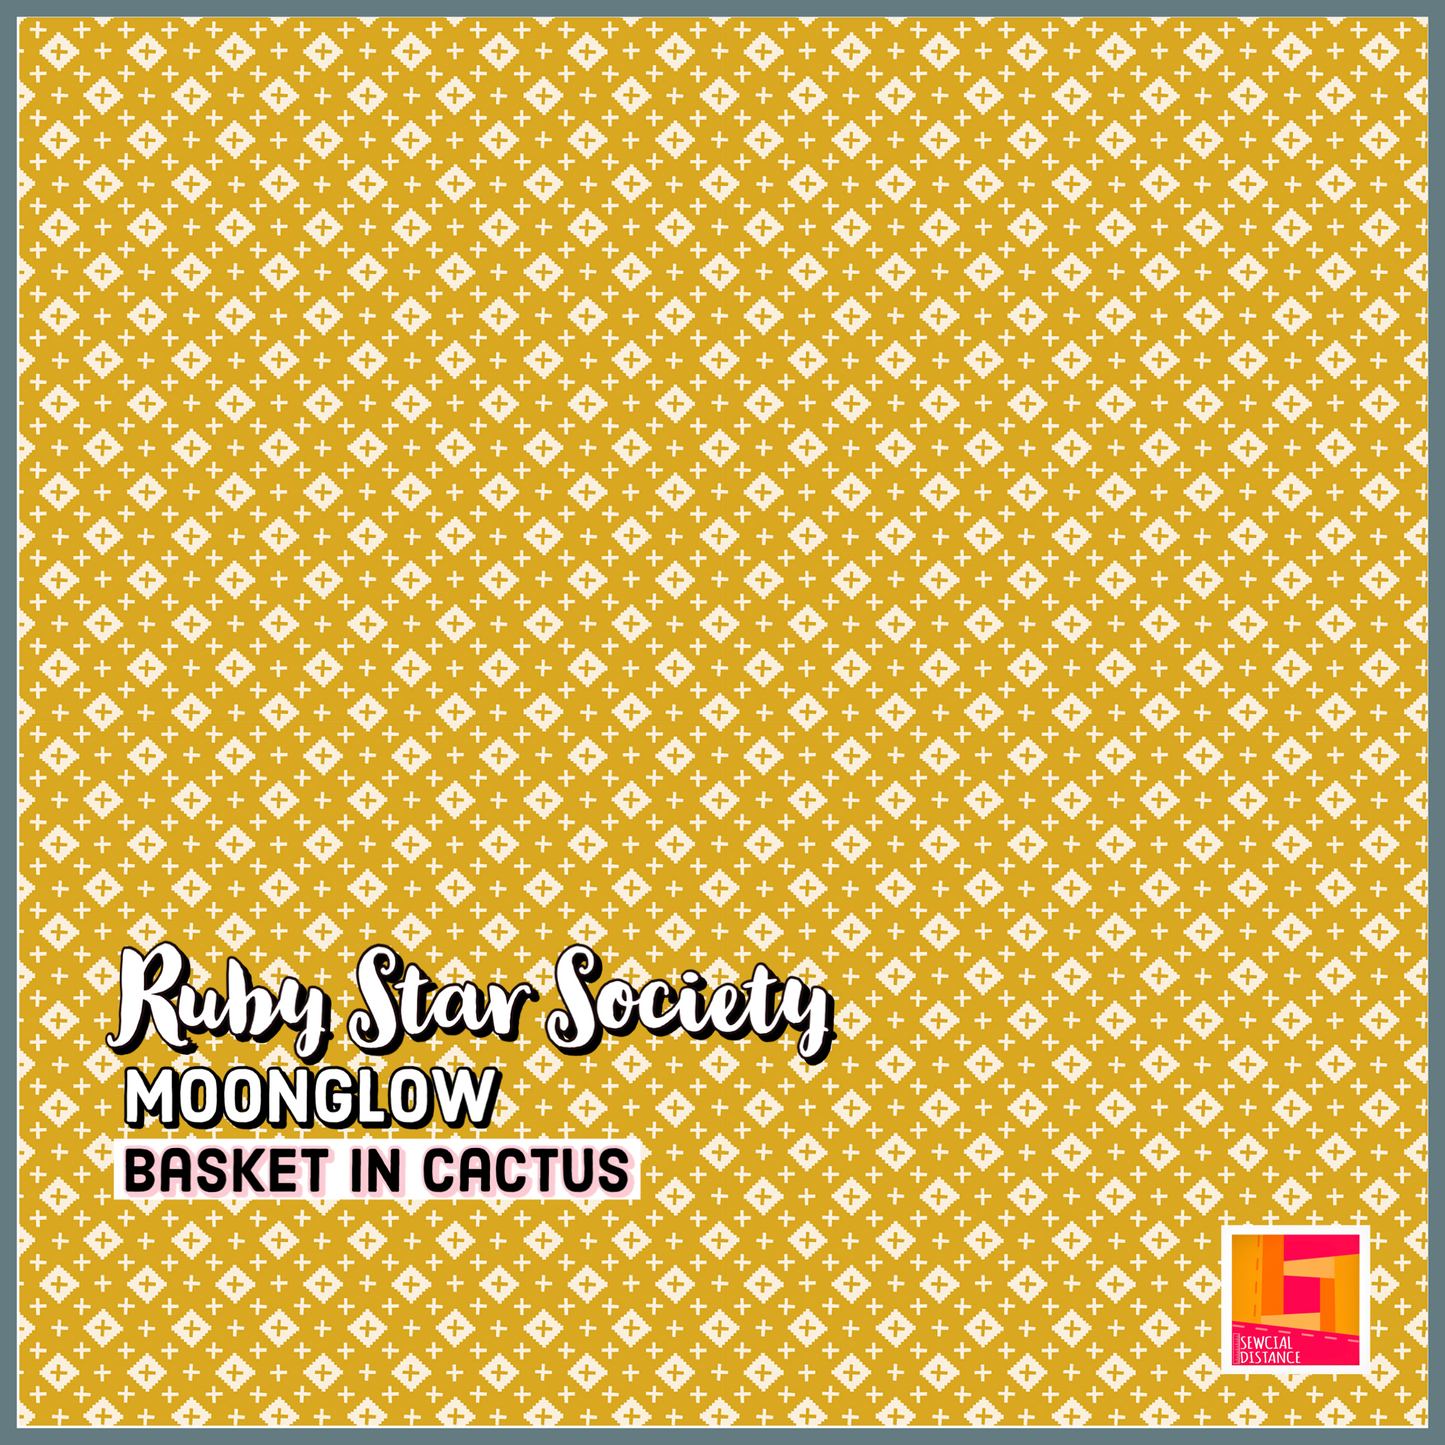 Ruby Star Society-Moonglow-Basket in Cactus